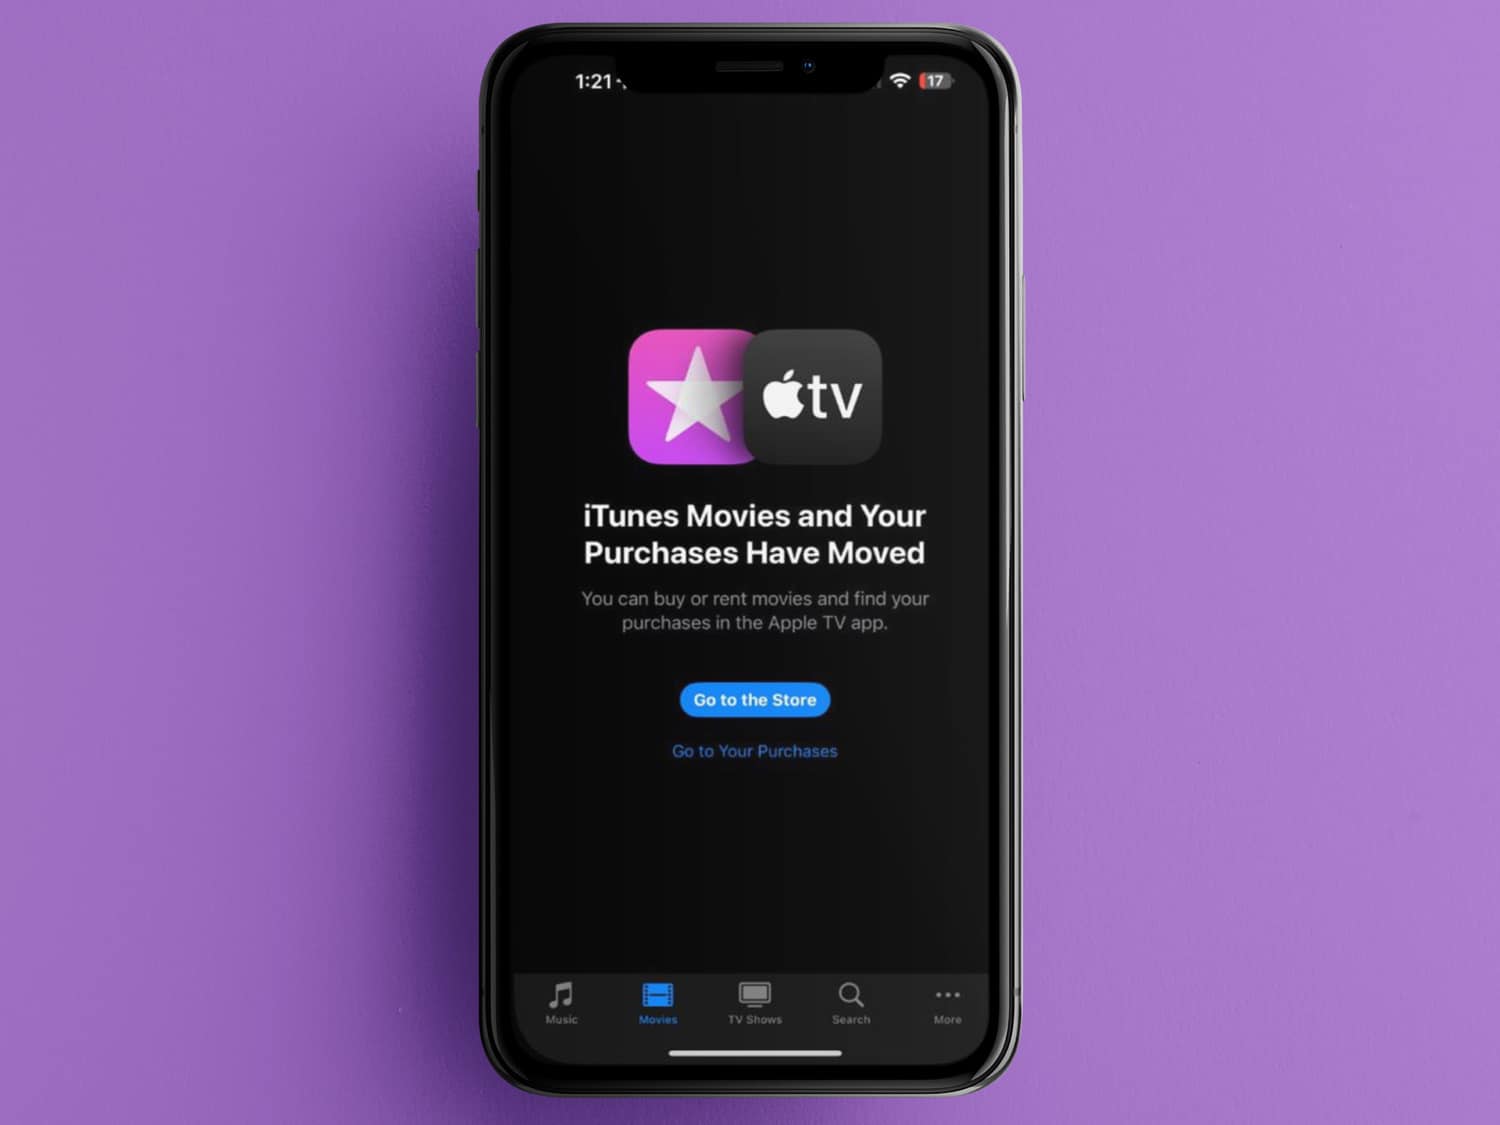 iTunes redirects to the Apple TV app on iPhone